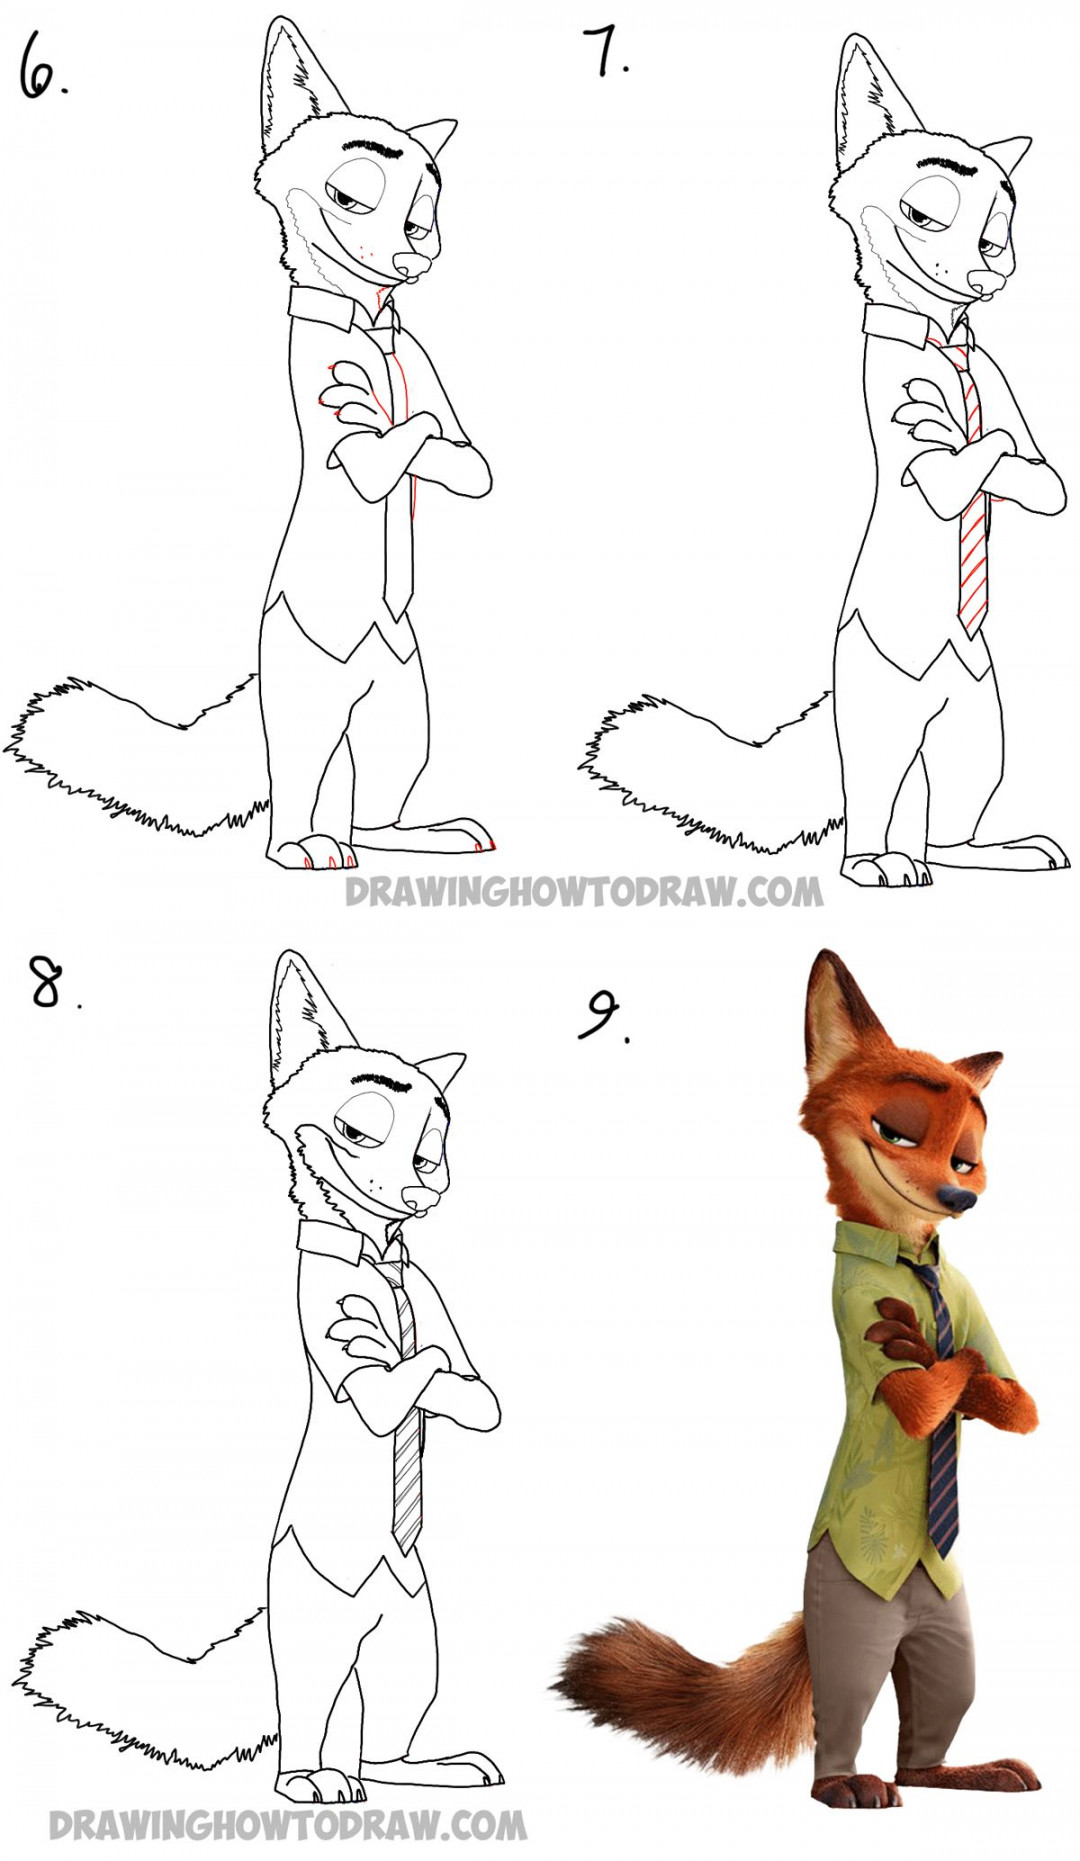 How to Draw Nick Wilde from Zootopia - Easy Step by Step Drawing